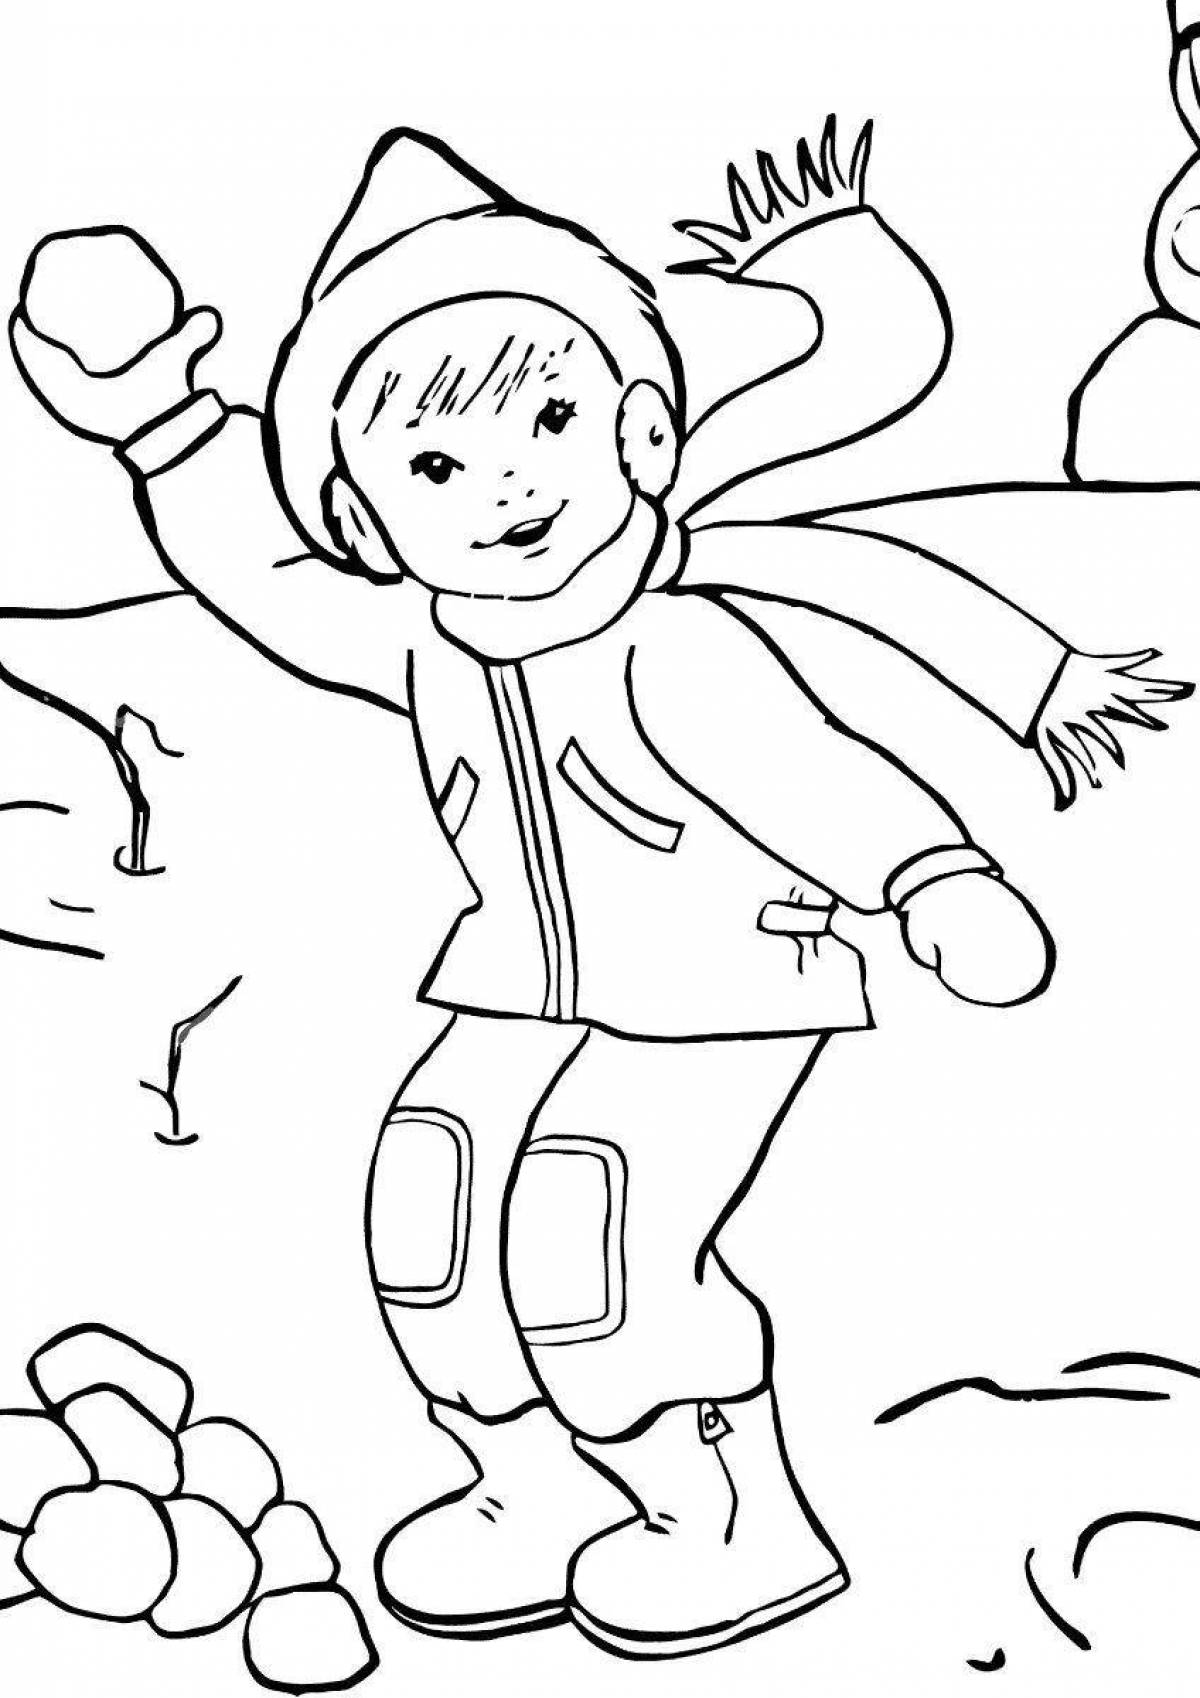 Joyful coloring for children boy in winter clothes